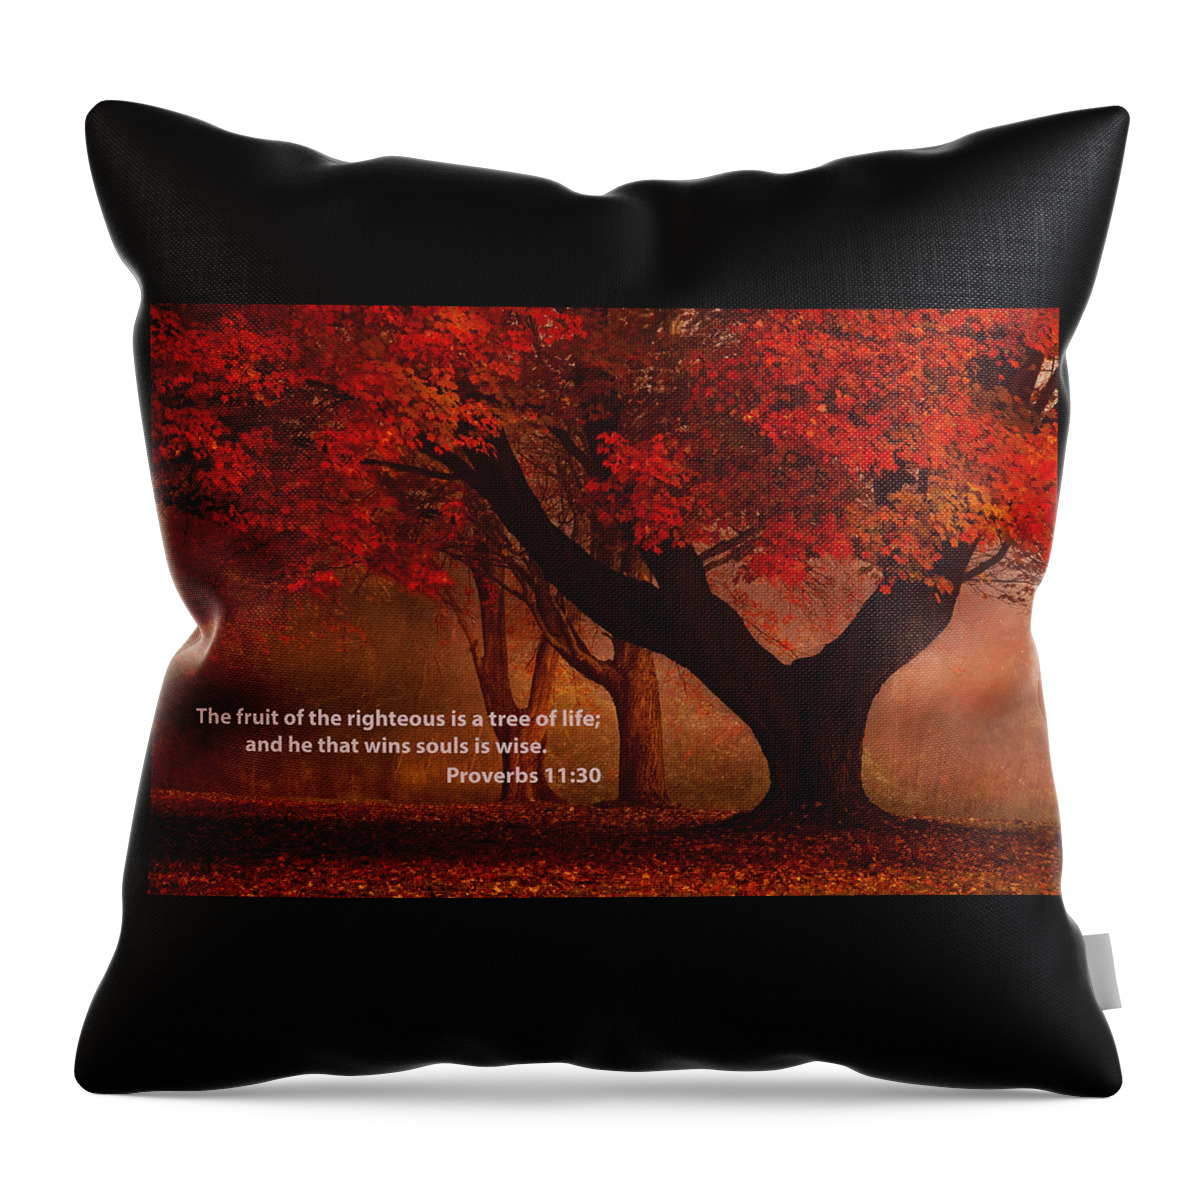 Proverbs 11:30 Throw Pillow featuring the photograph Proverbs 11 30 Scripture and Picture by Ken Smith